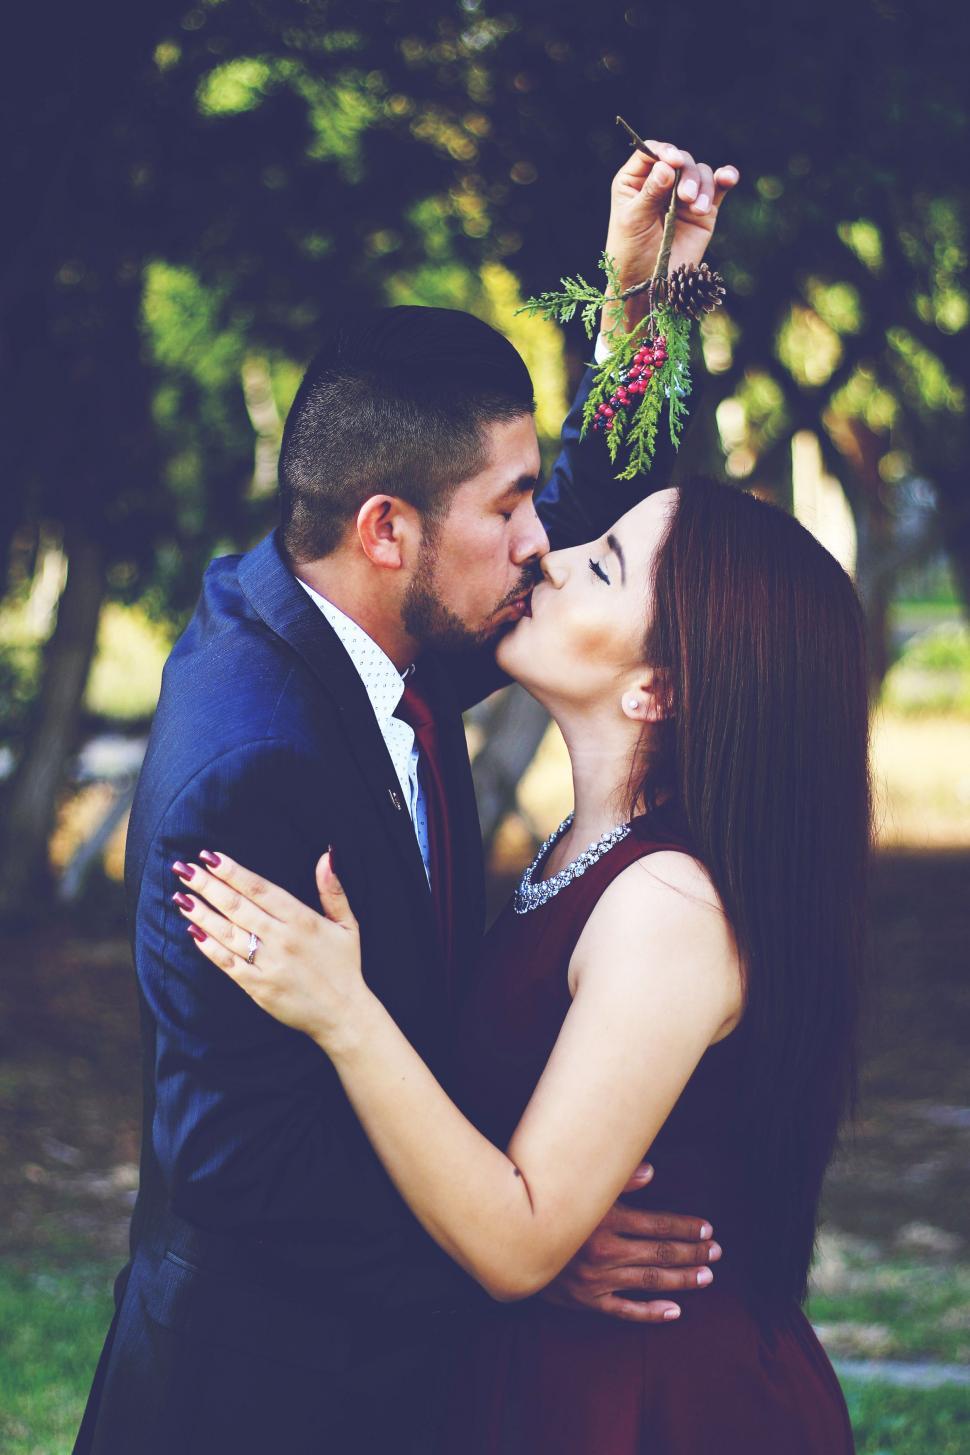 Free Image of Man and Woman Kissing in a Park 